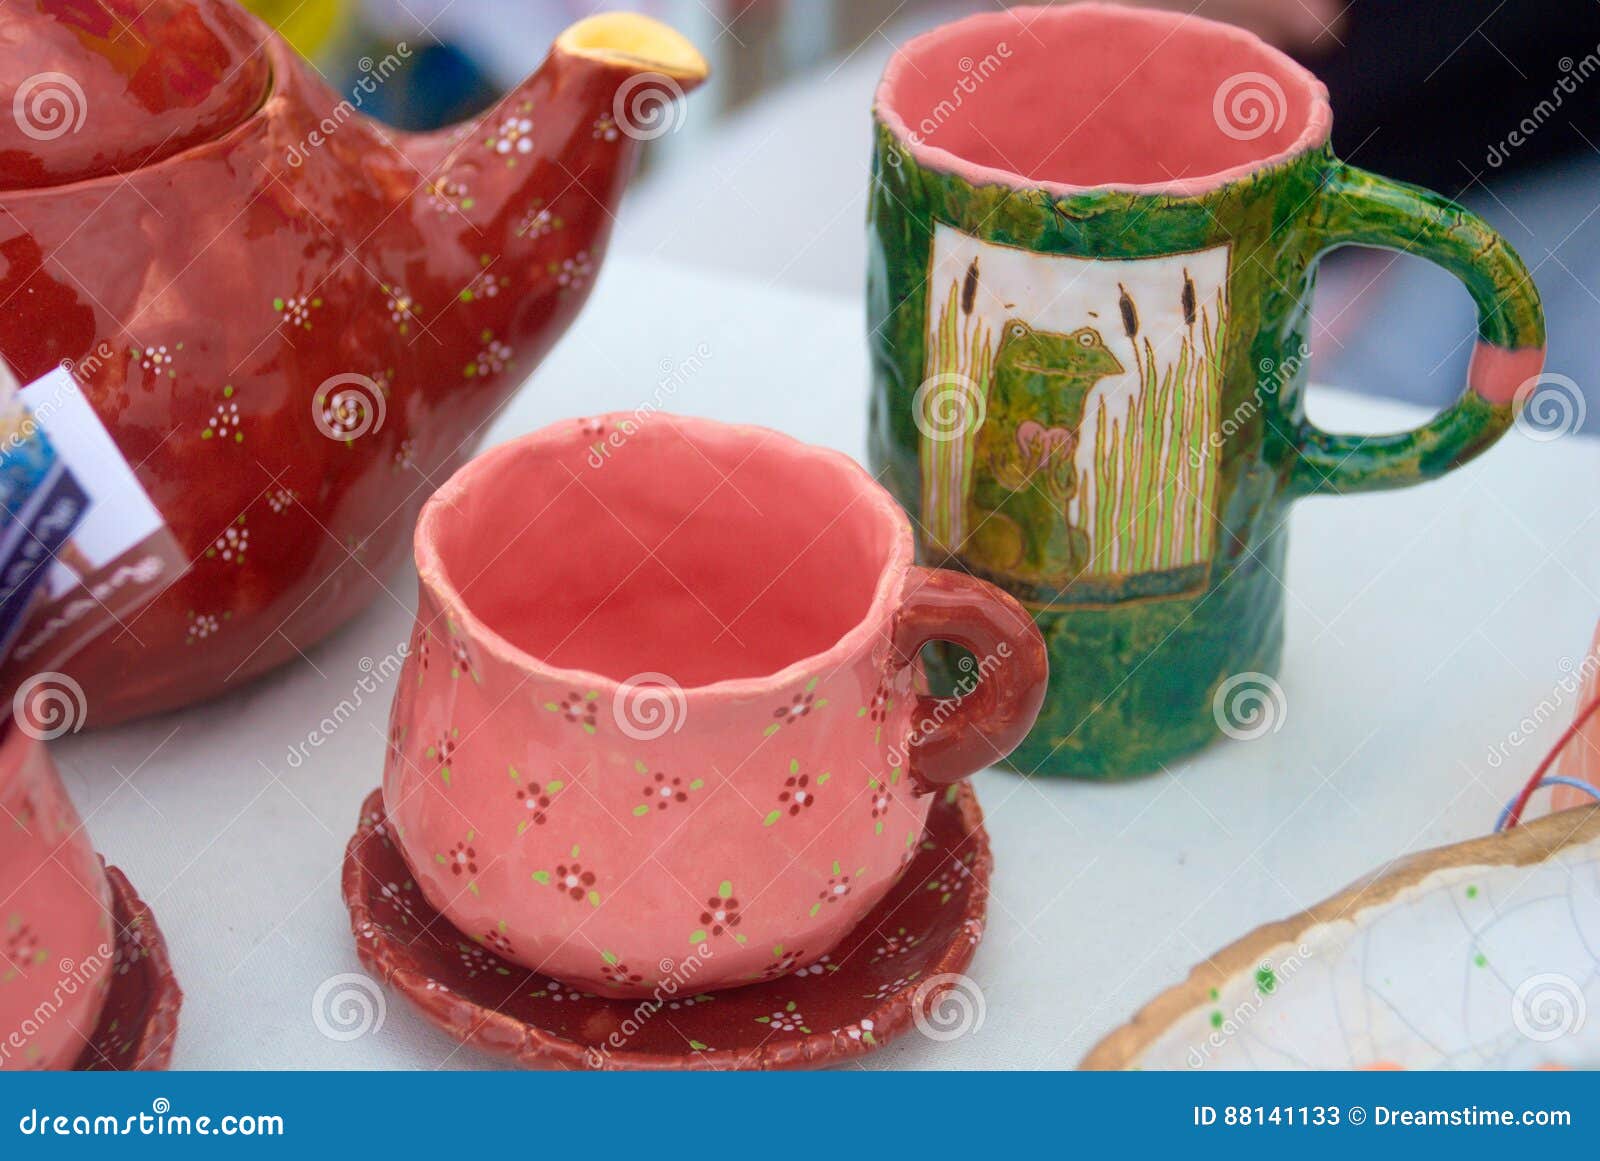 Ceramic cups and kettle stock image. Image of furnace - 88141133